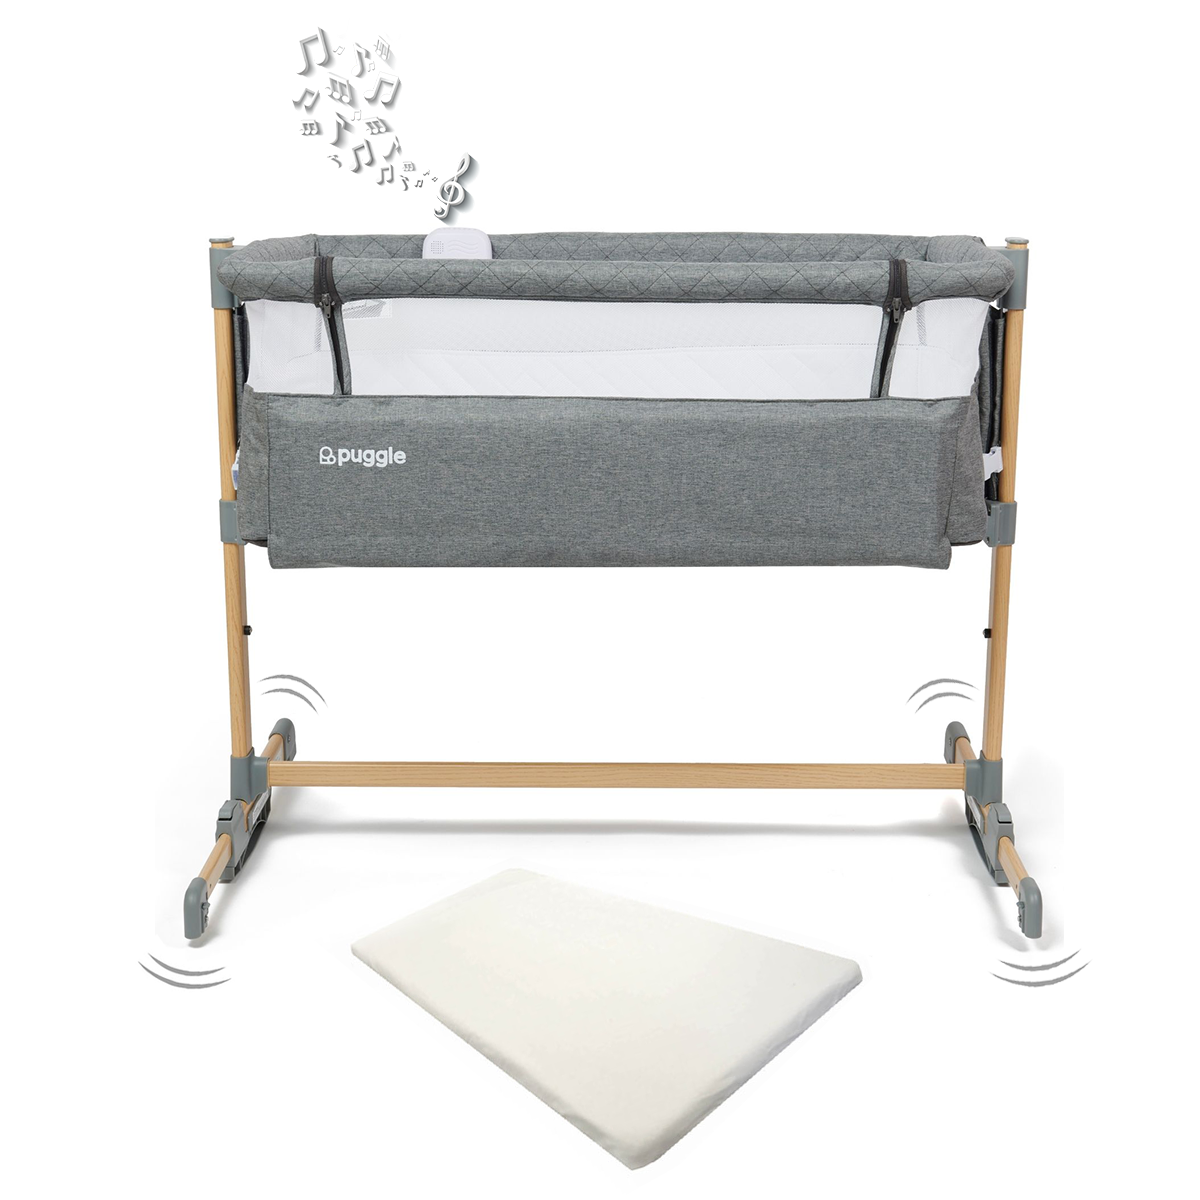 Puggle Sleepy Luxe Bedside Crib with Rocking, Lights, Sound & Fitted Sheet - Graphite Grey / Wood